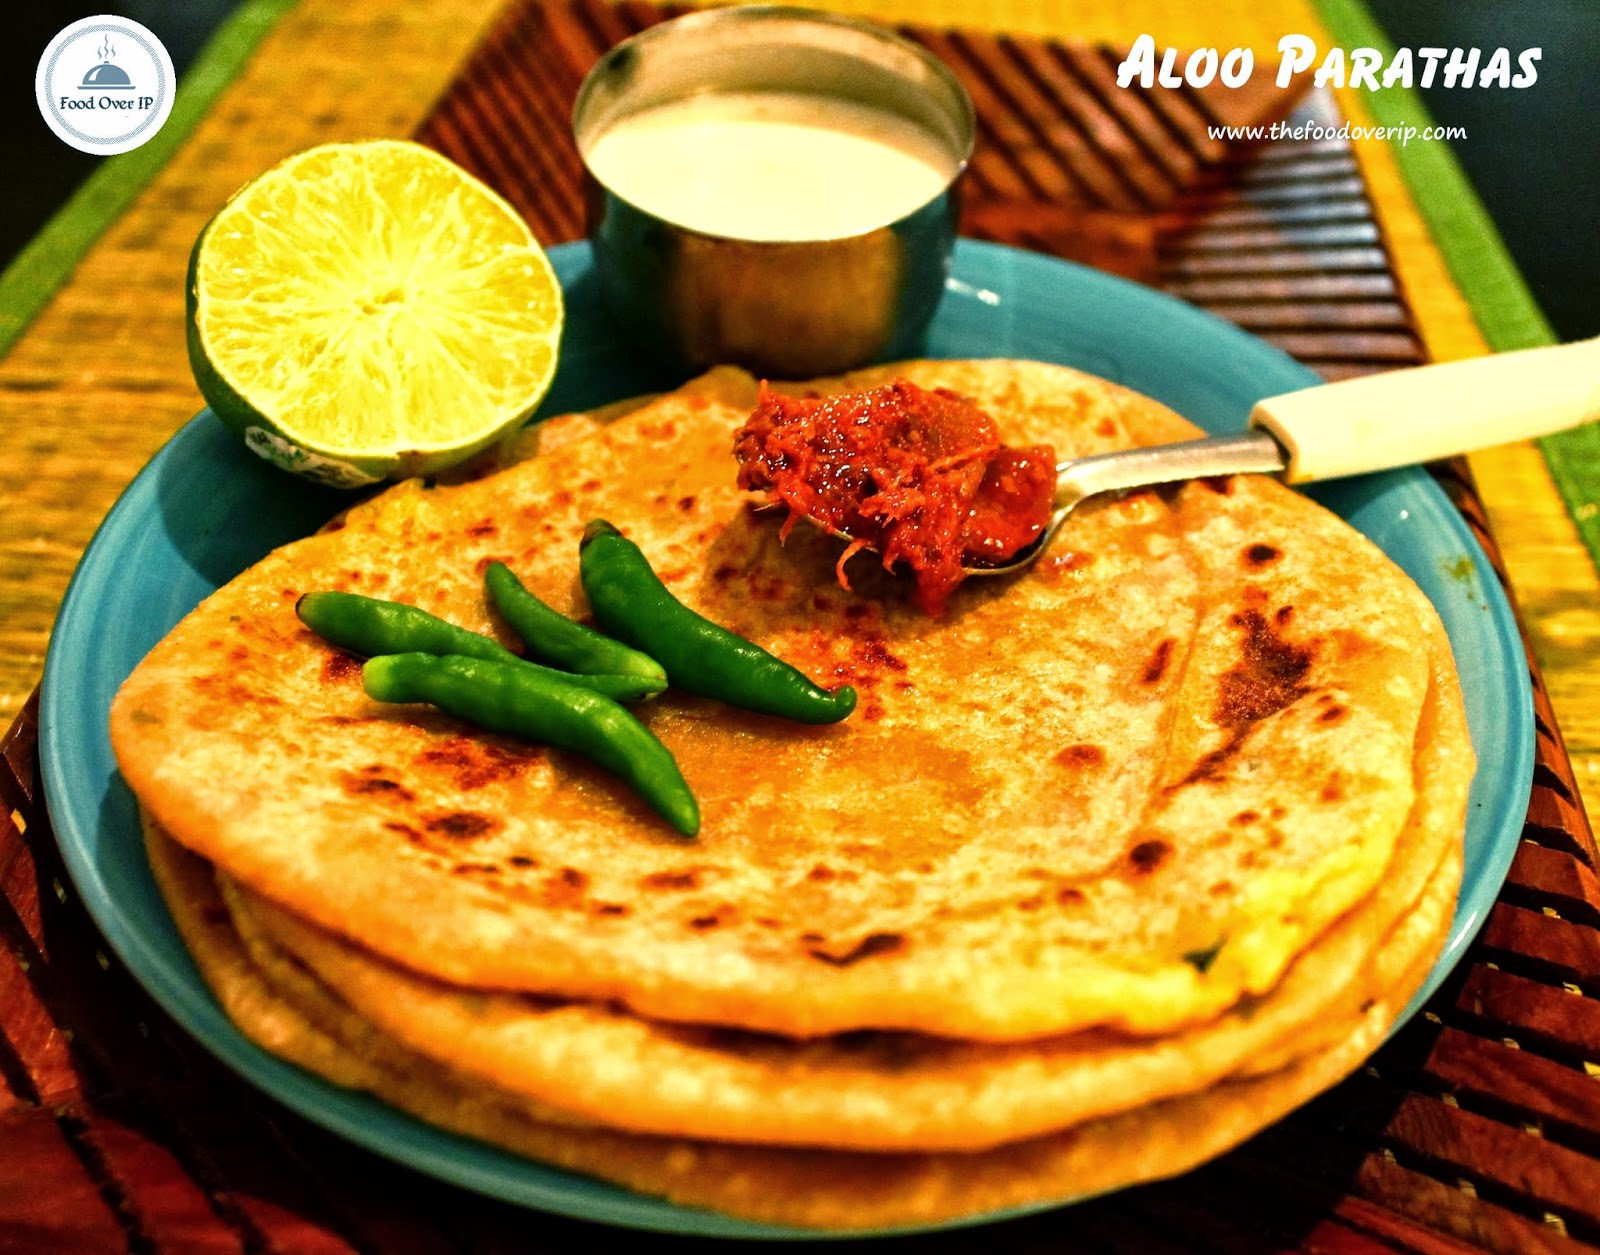 Food over IP: Aloo Paratha Recipe - With Step by Step Pictures